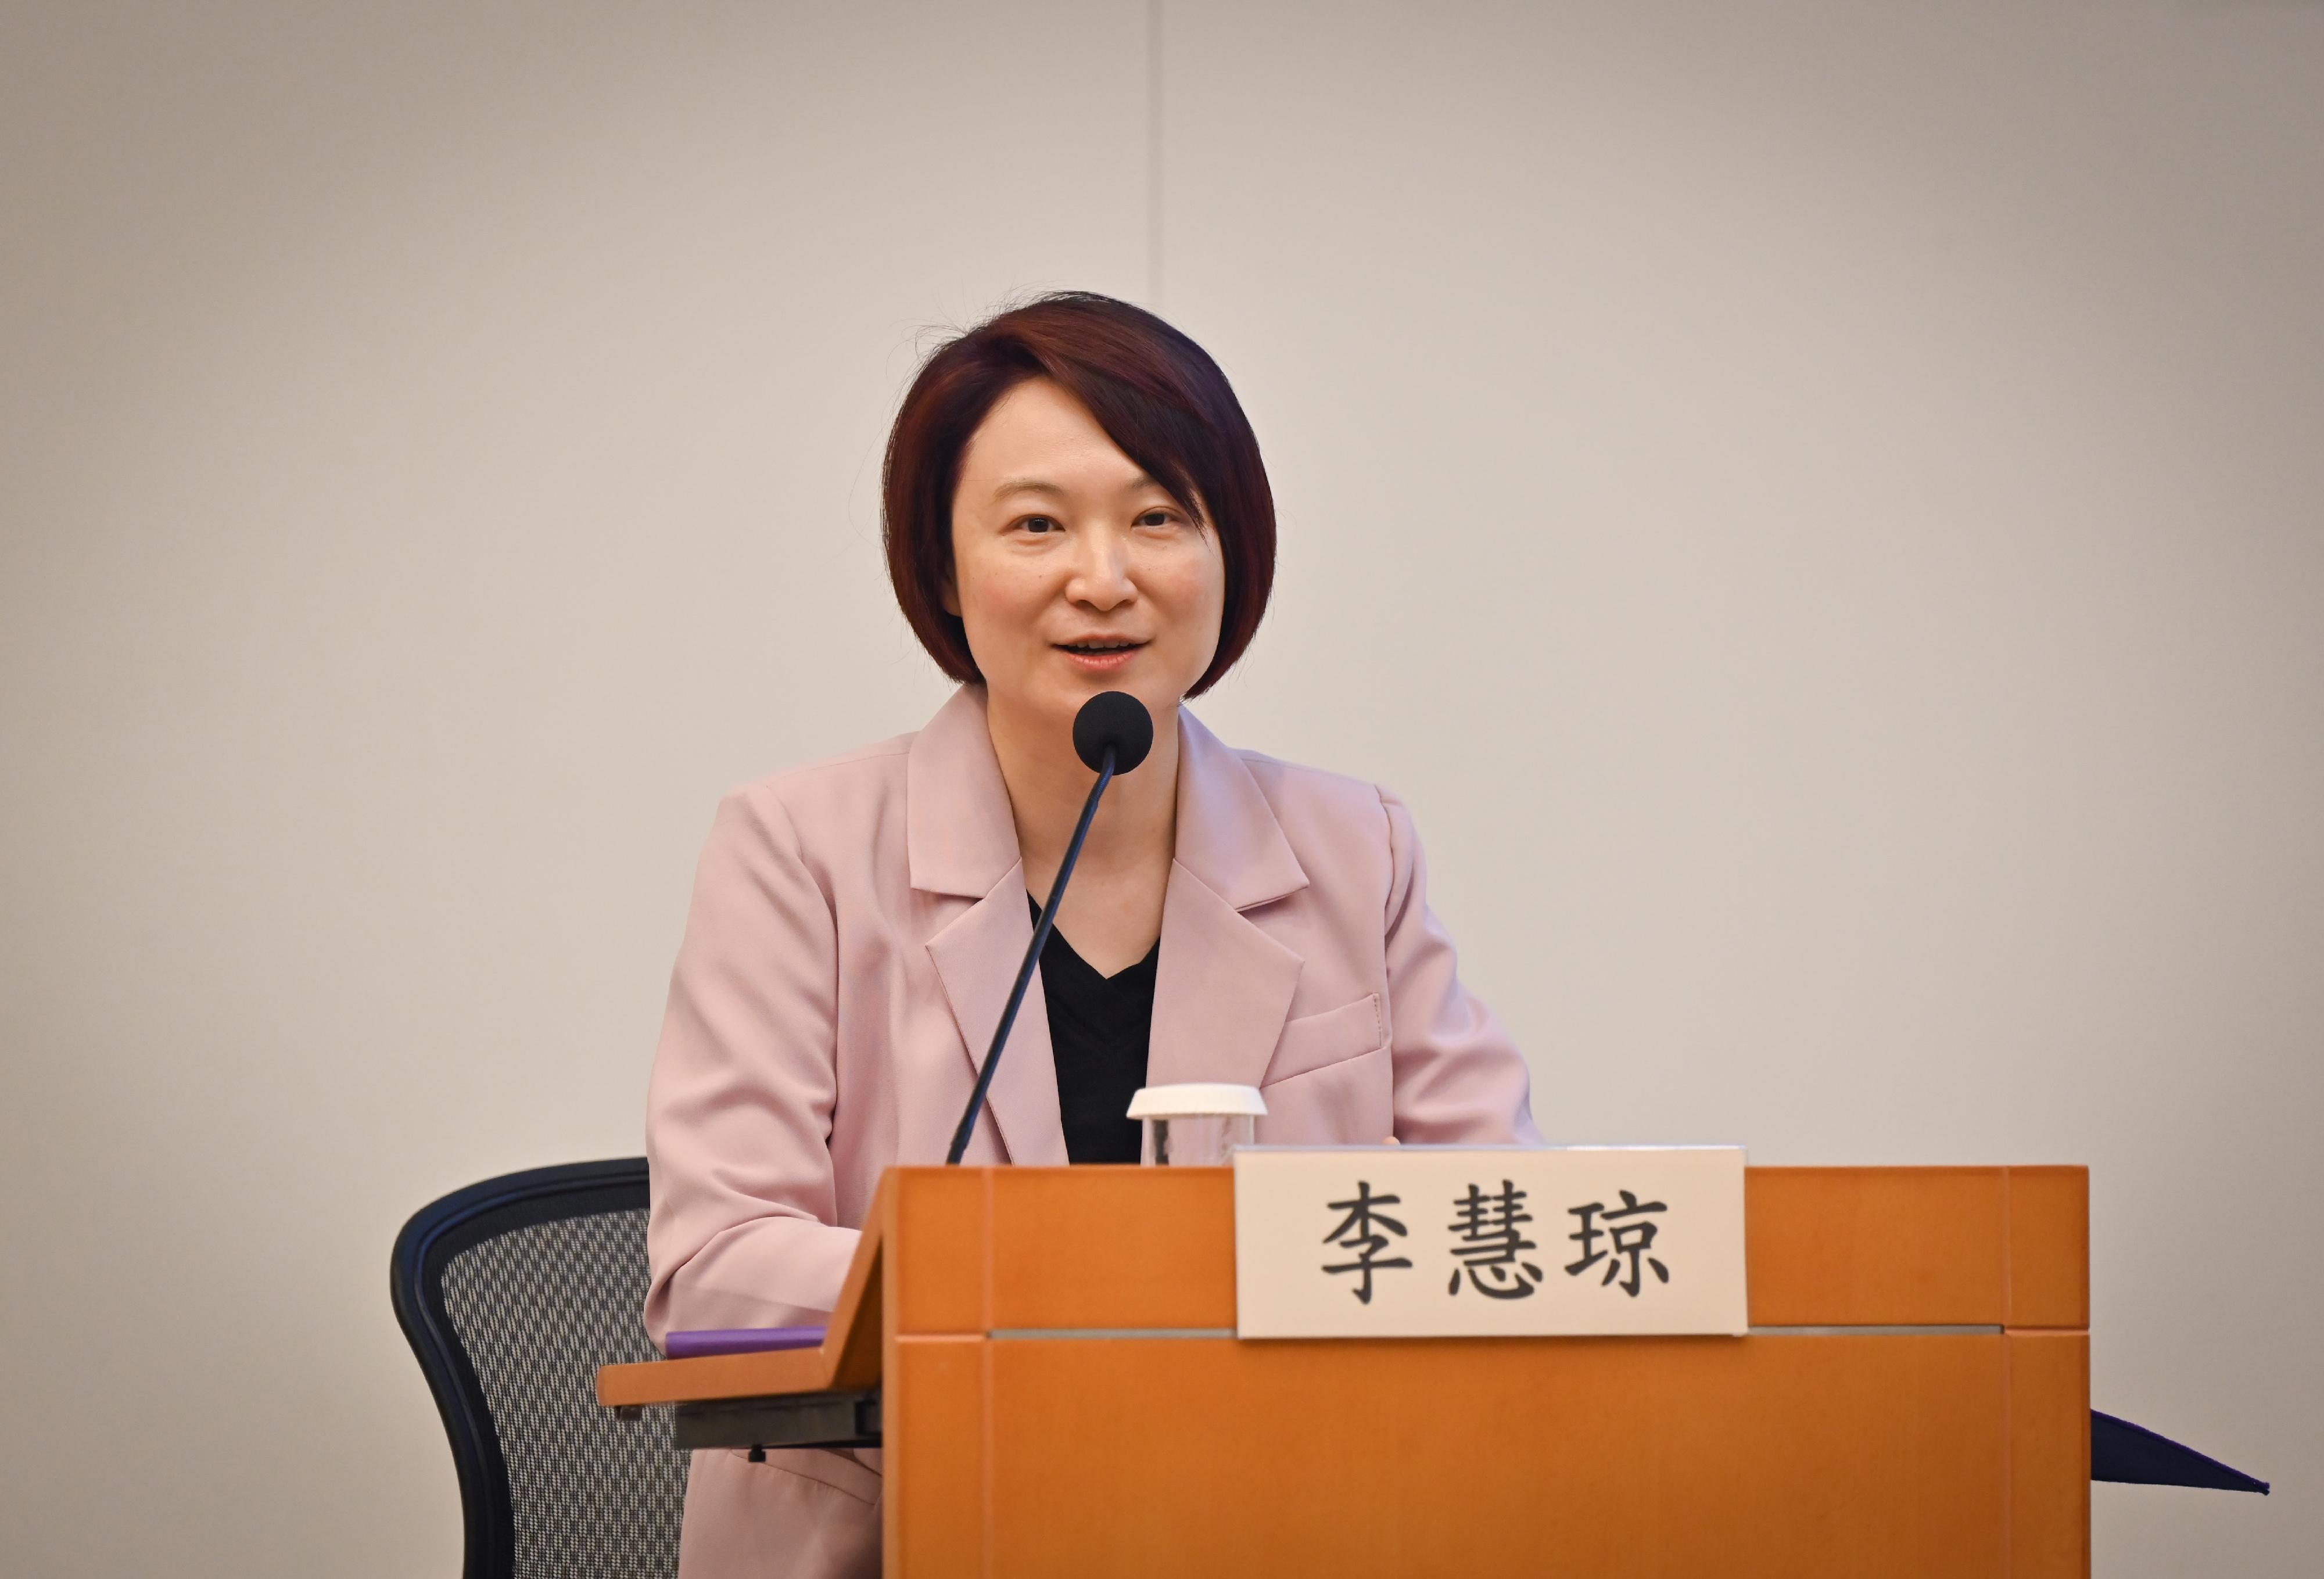 The Hong Kong Special Administrative Region Government today (March 24) held a sharing session on the spirit of "two sessions" at the Central Government Offices. Photo shows member of the Standing Committee of the 14th National People's Congress Ms Starry Lee sharing her views.